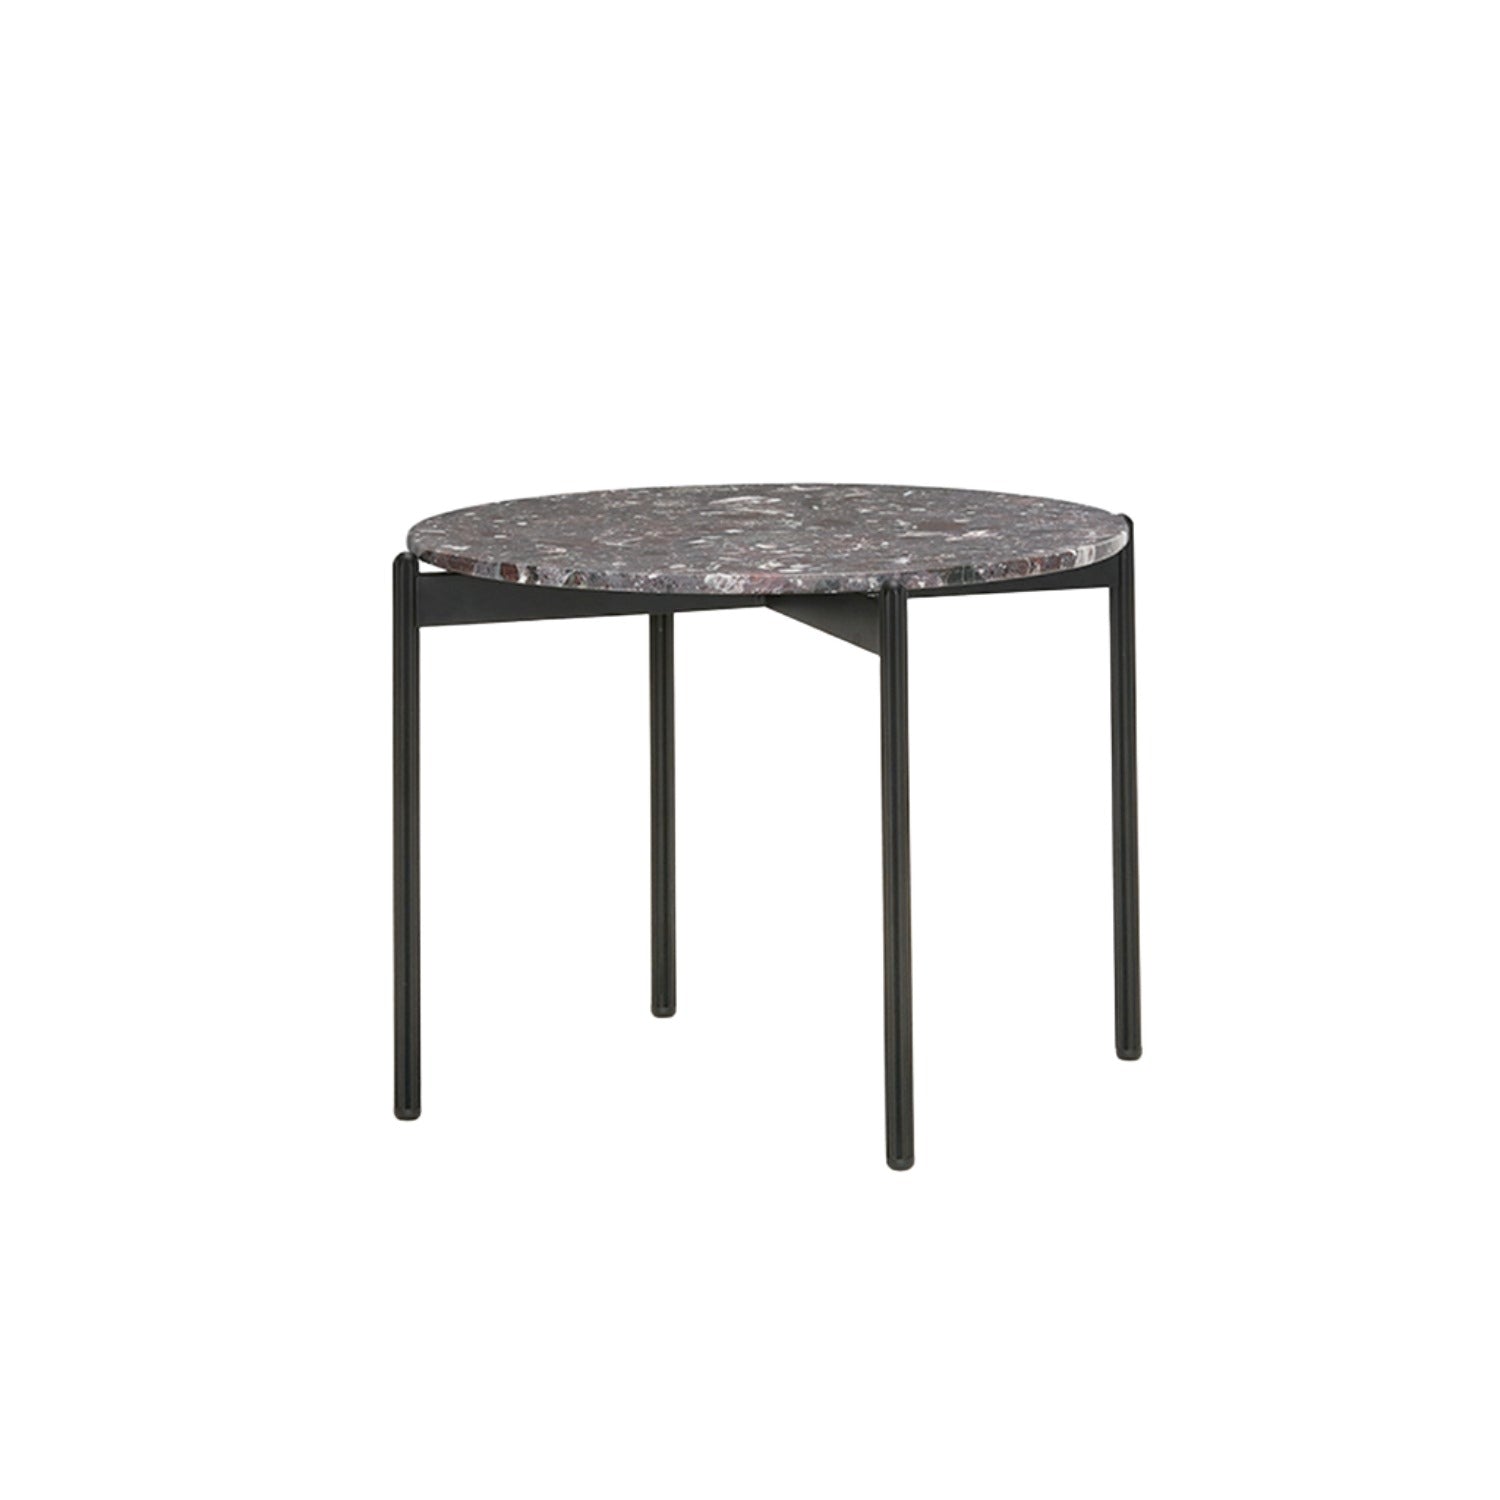 Pedrali Blume round coffee side table in composite marble and black legs